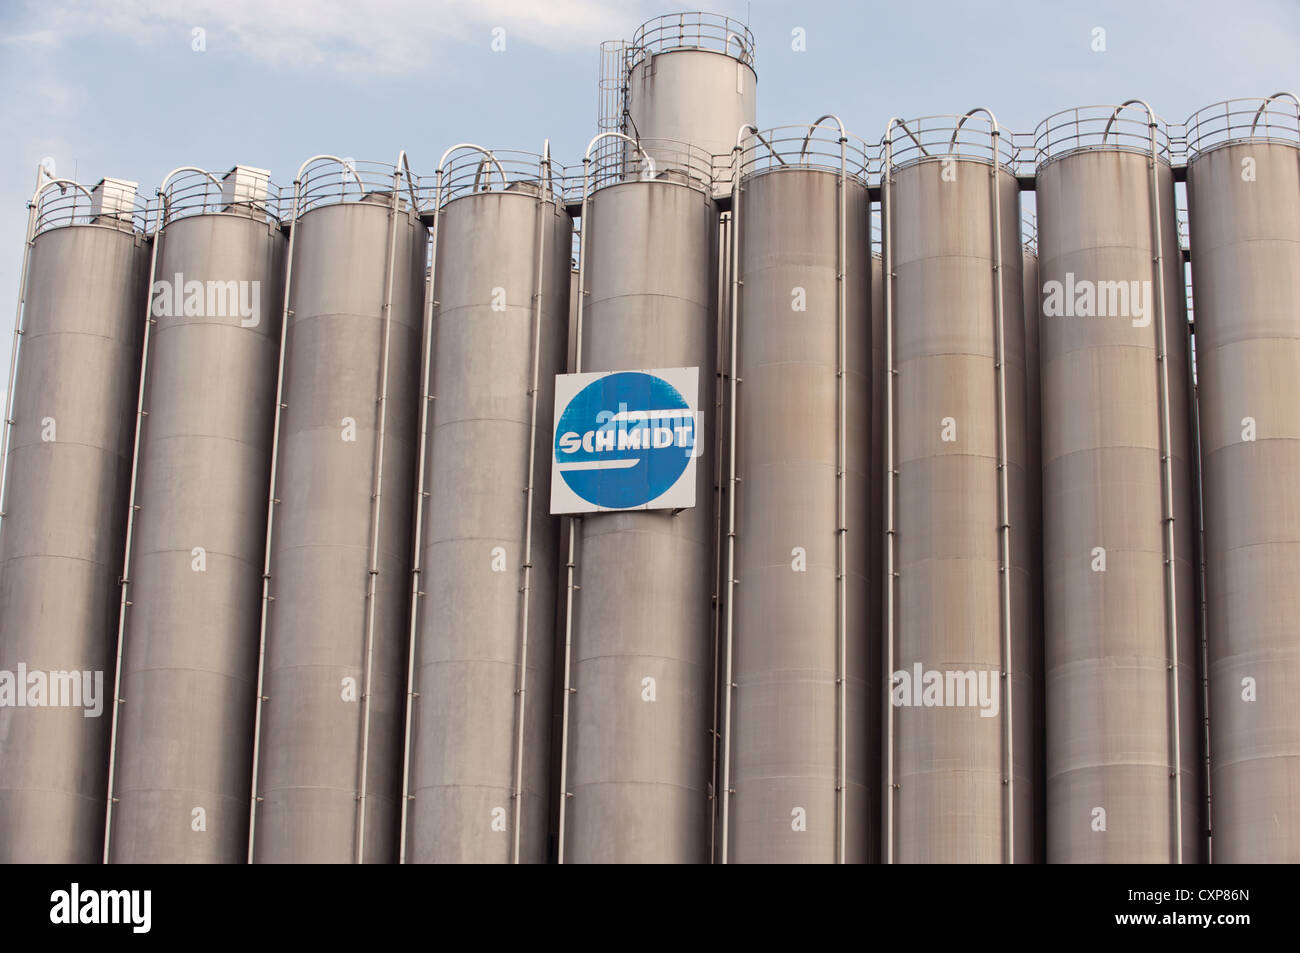 Industrial chemical tanks, Cologne, Germany. Stock Photo